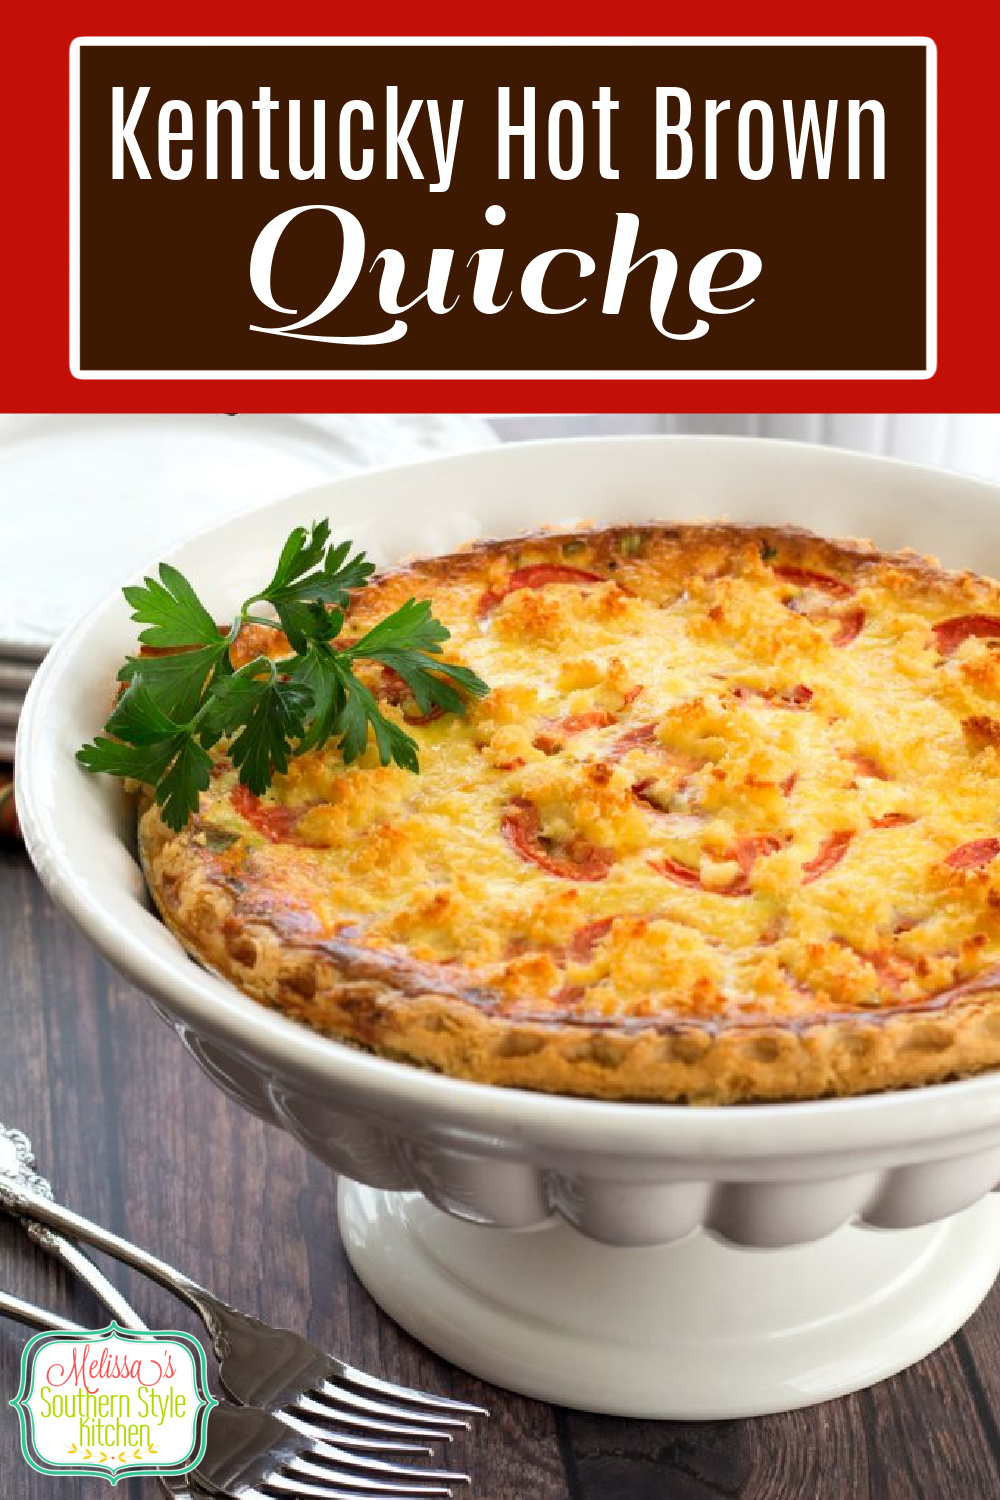 This easy Cheesy Kentucky Hot Brown Quiche features all of the flavors of the famous hot brown sandwich and transforms them into a delicious quiche #hotbrown #kentuckyhotbrown #quiche #hotbrownquiche #turkeyrecipes #brunch #holidaybrunch #quicherecipes #southernfood #southernrecipes via @melissasssk